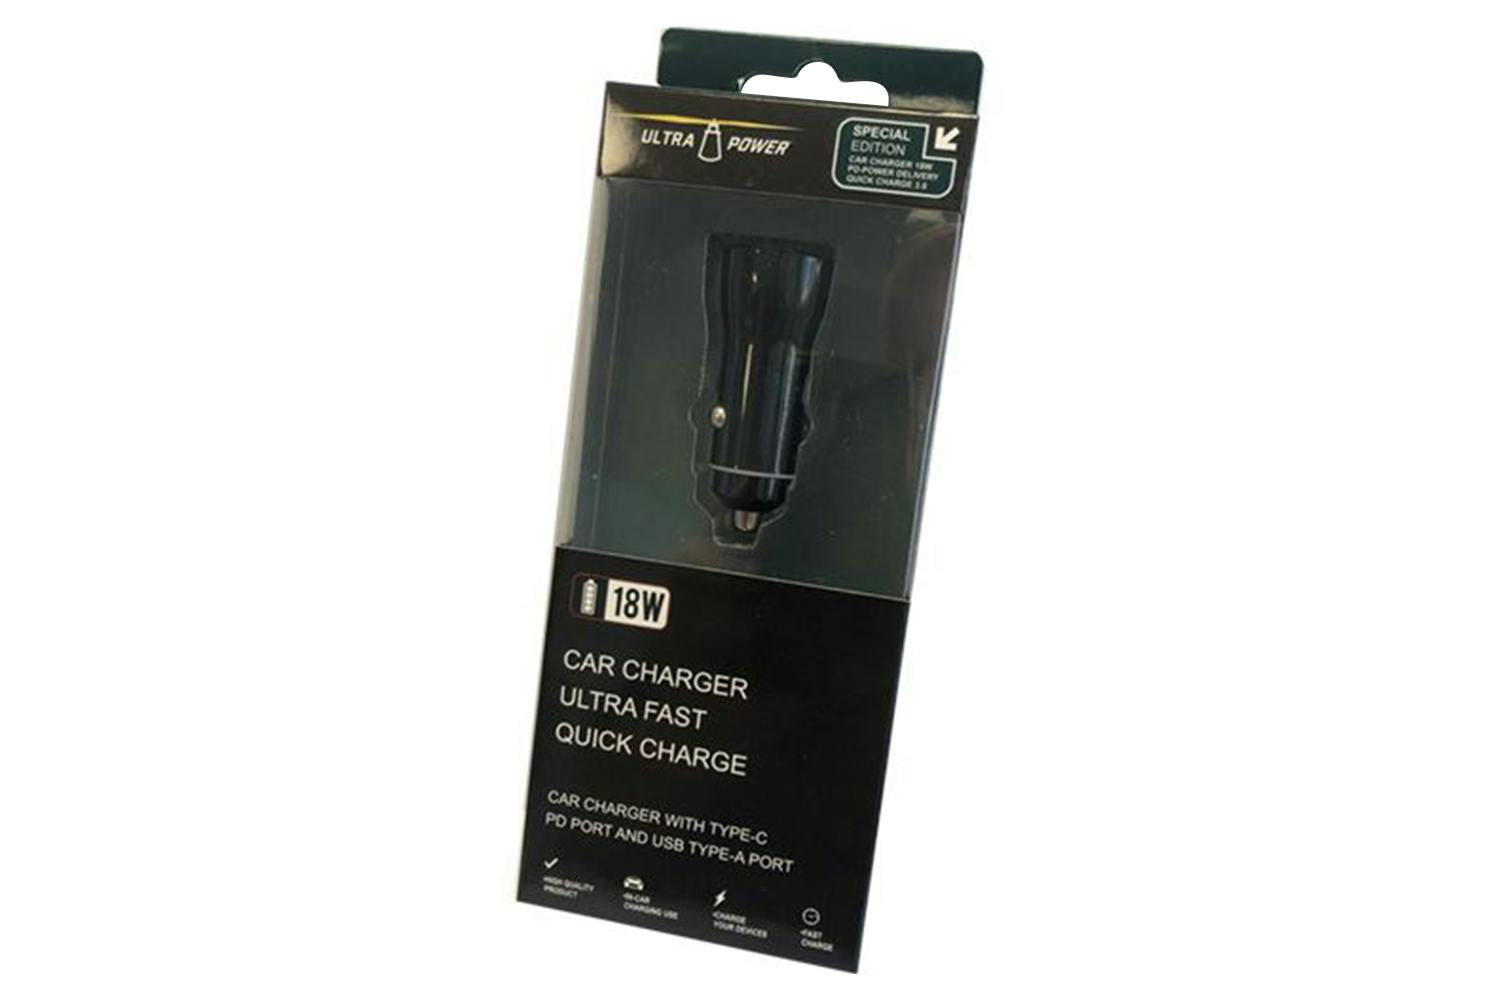 UltraPower 18W Type-C PD Port & USB Type-A Port Car Charger | Black